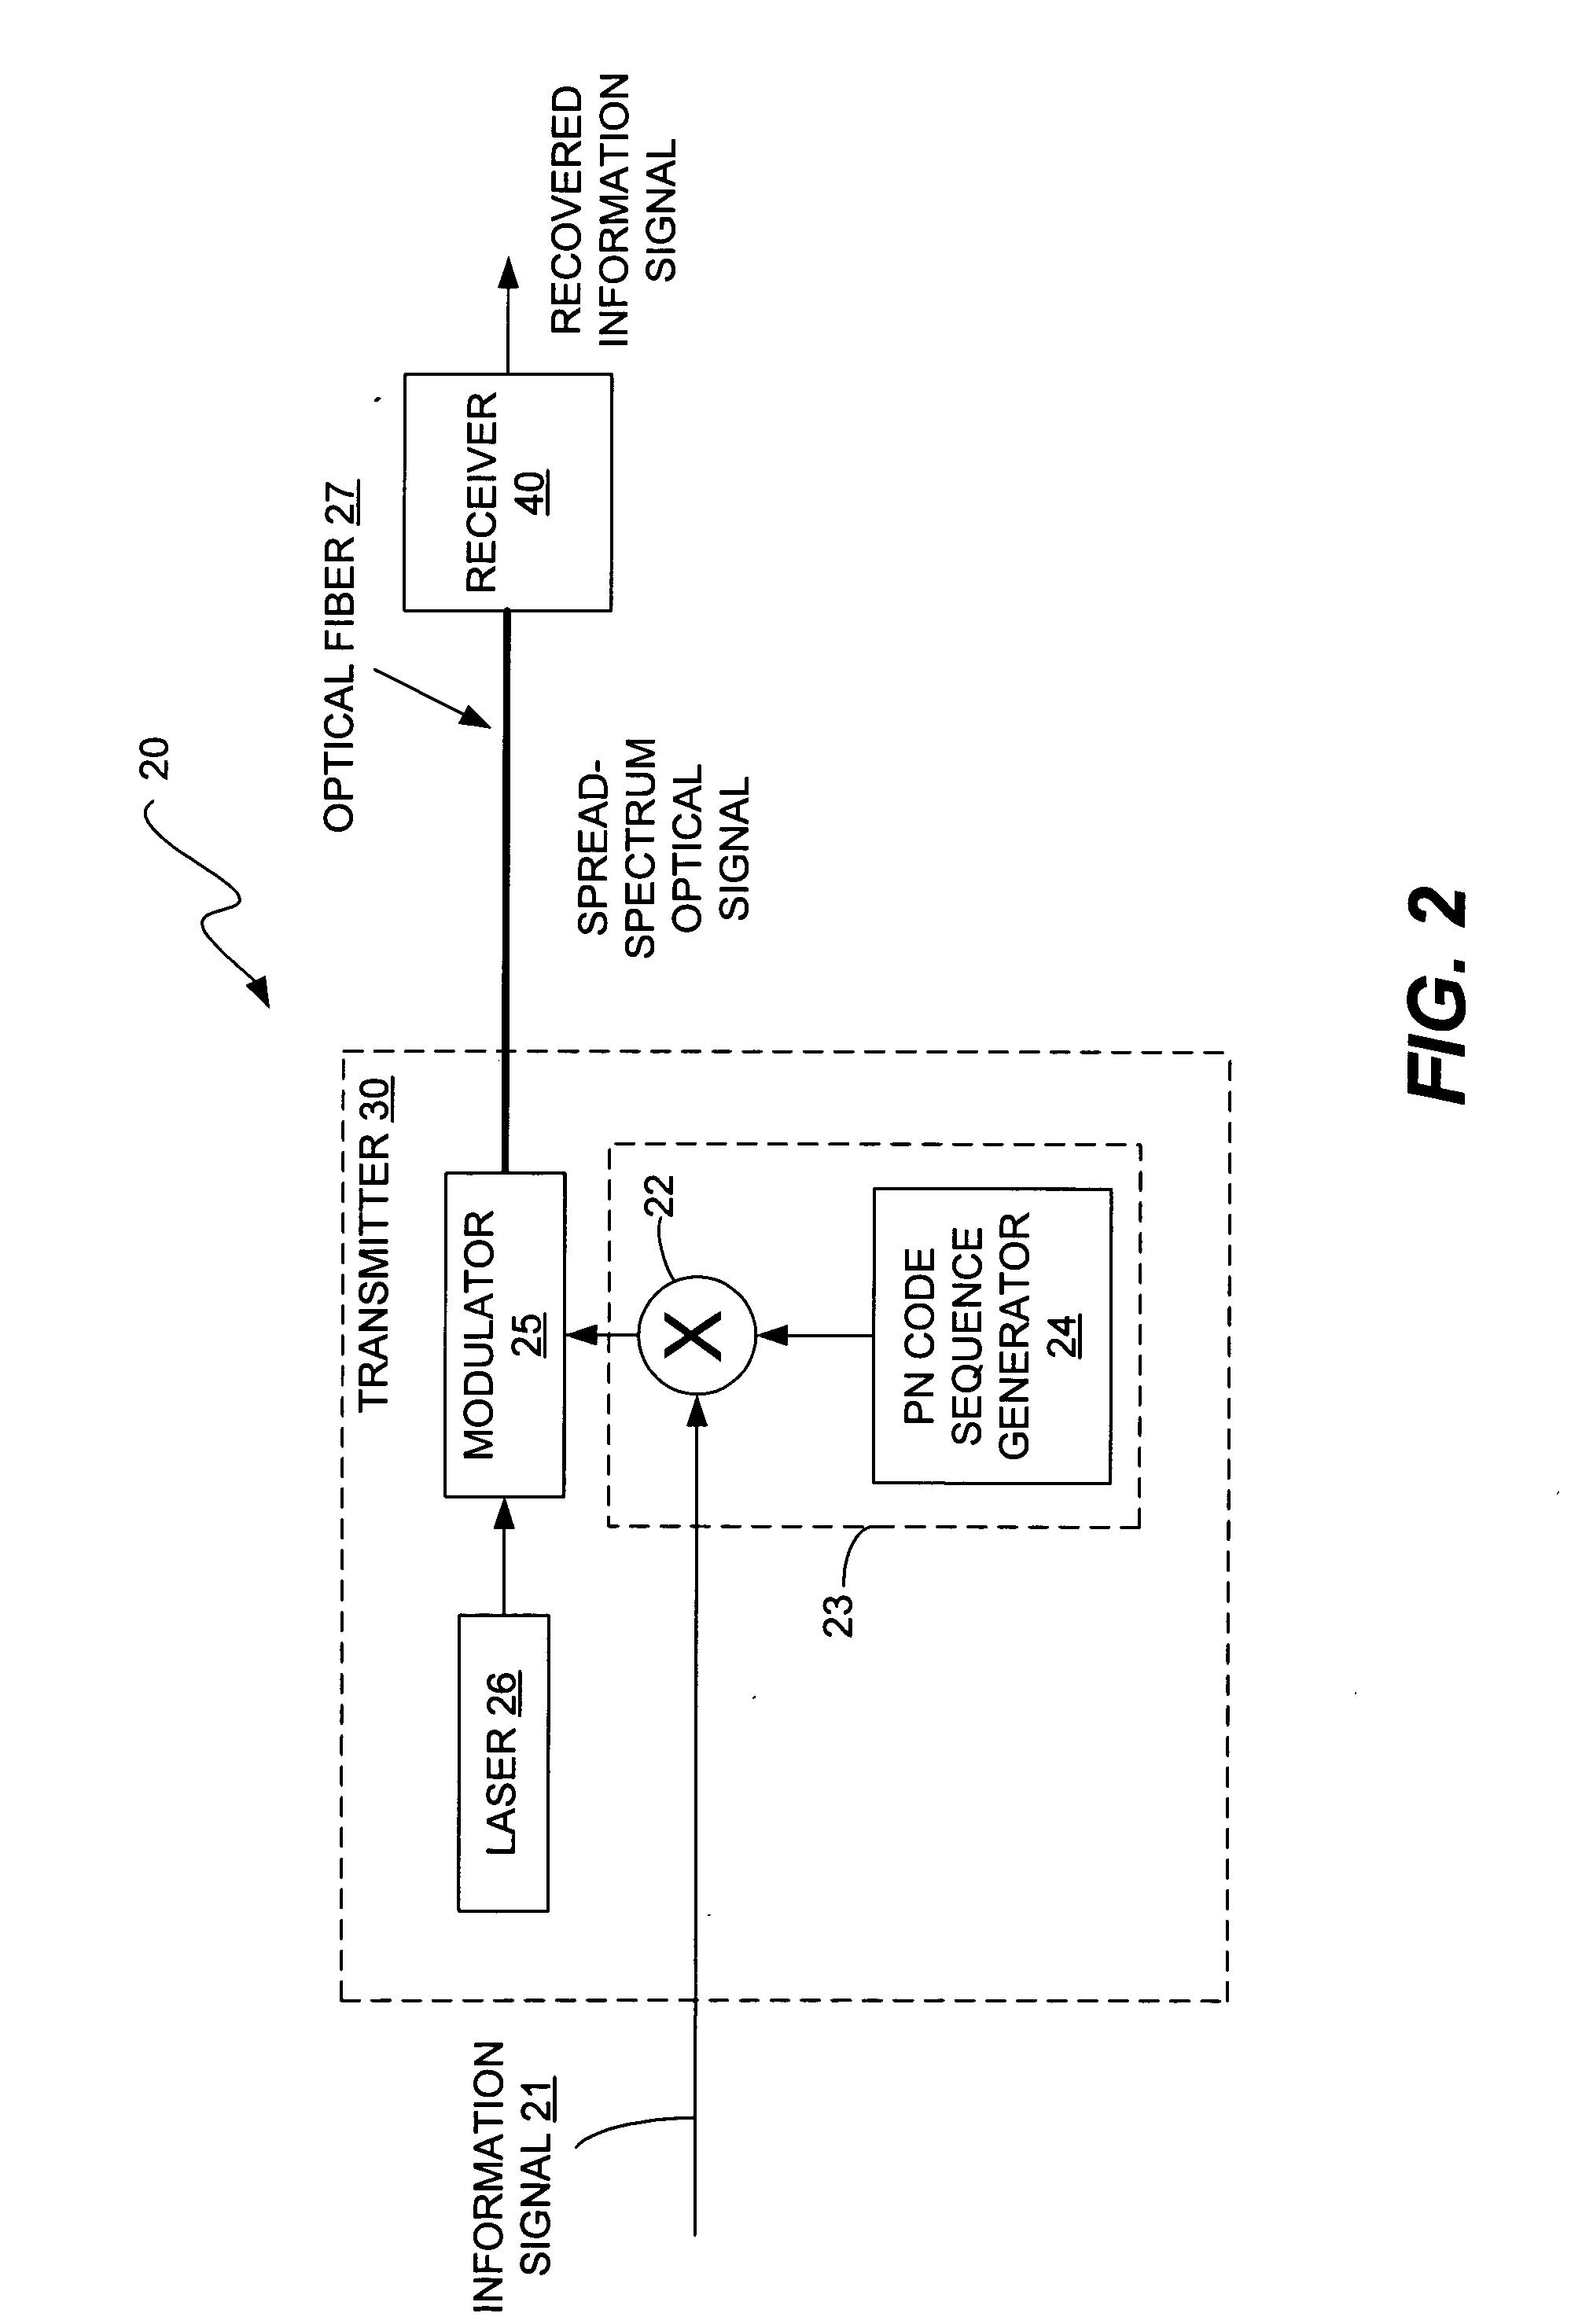 Optical communication system and method using spread-spectrum encoding